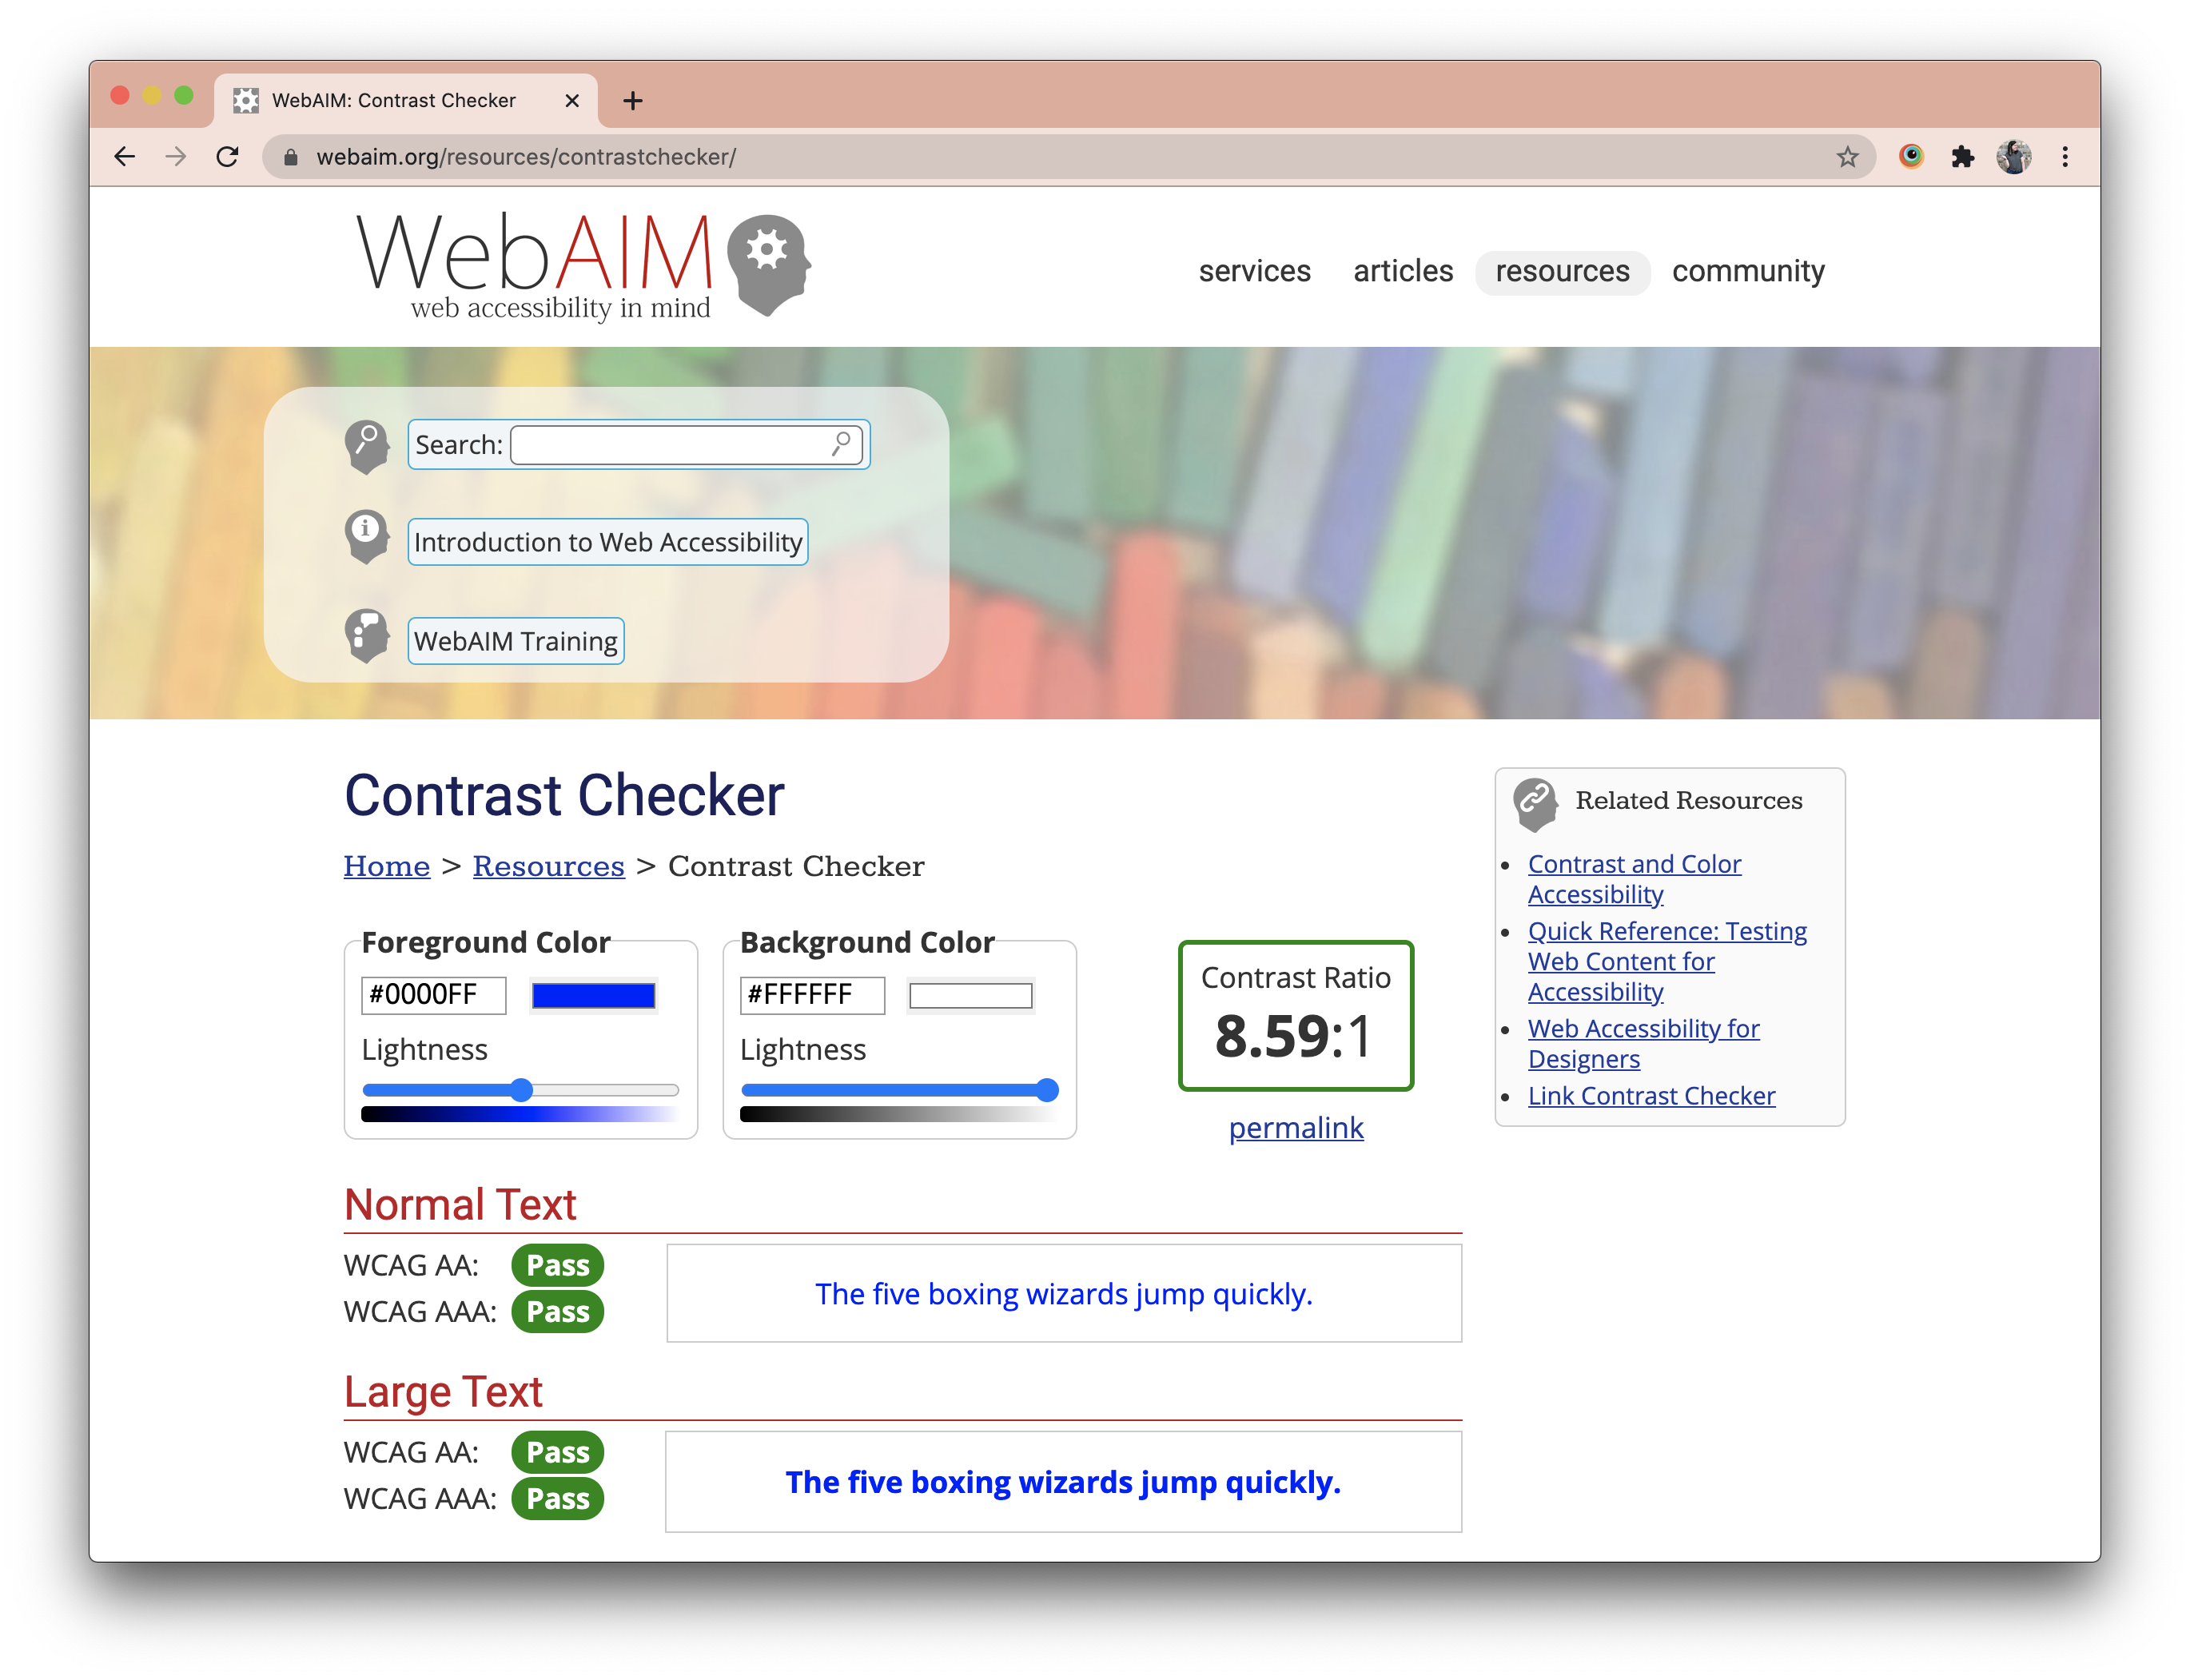 A screenshot of the WebAIM Contrast Checker in action. It shows the overall contrast ratio of two colors to the right of two inputs, and below that it shows whether the contrast passes level AA and AAA standards for both normal and large sized texts.